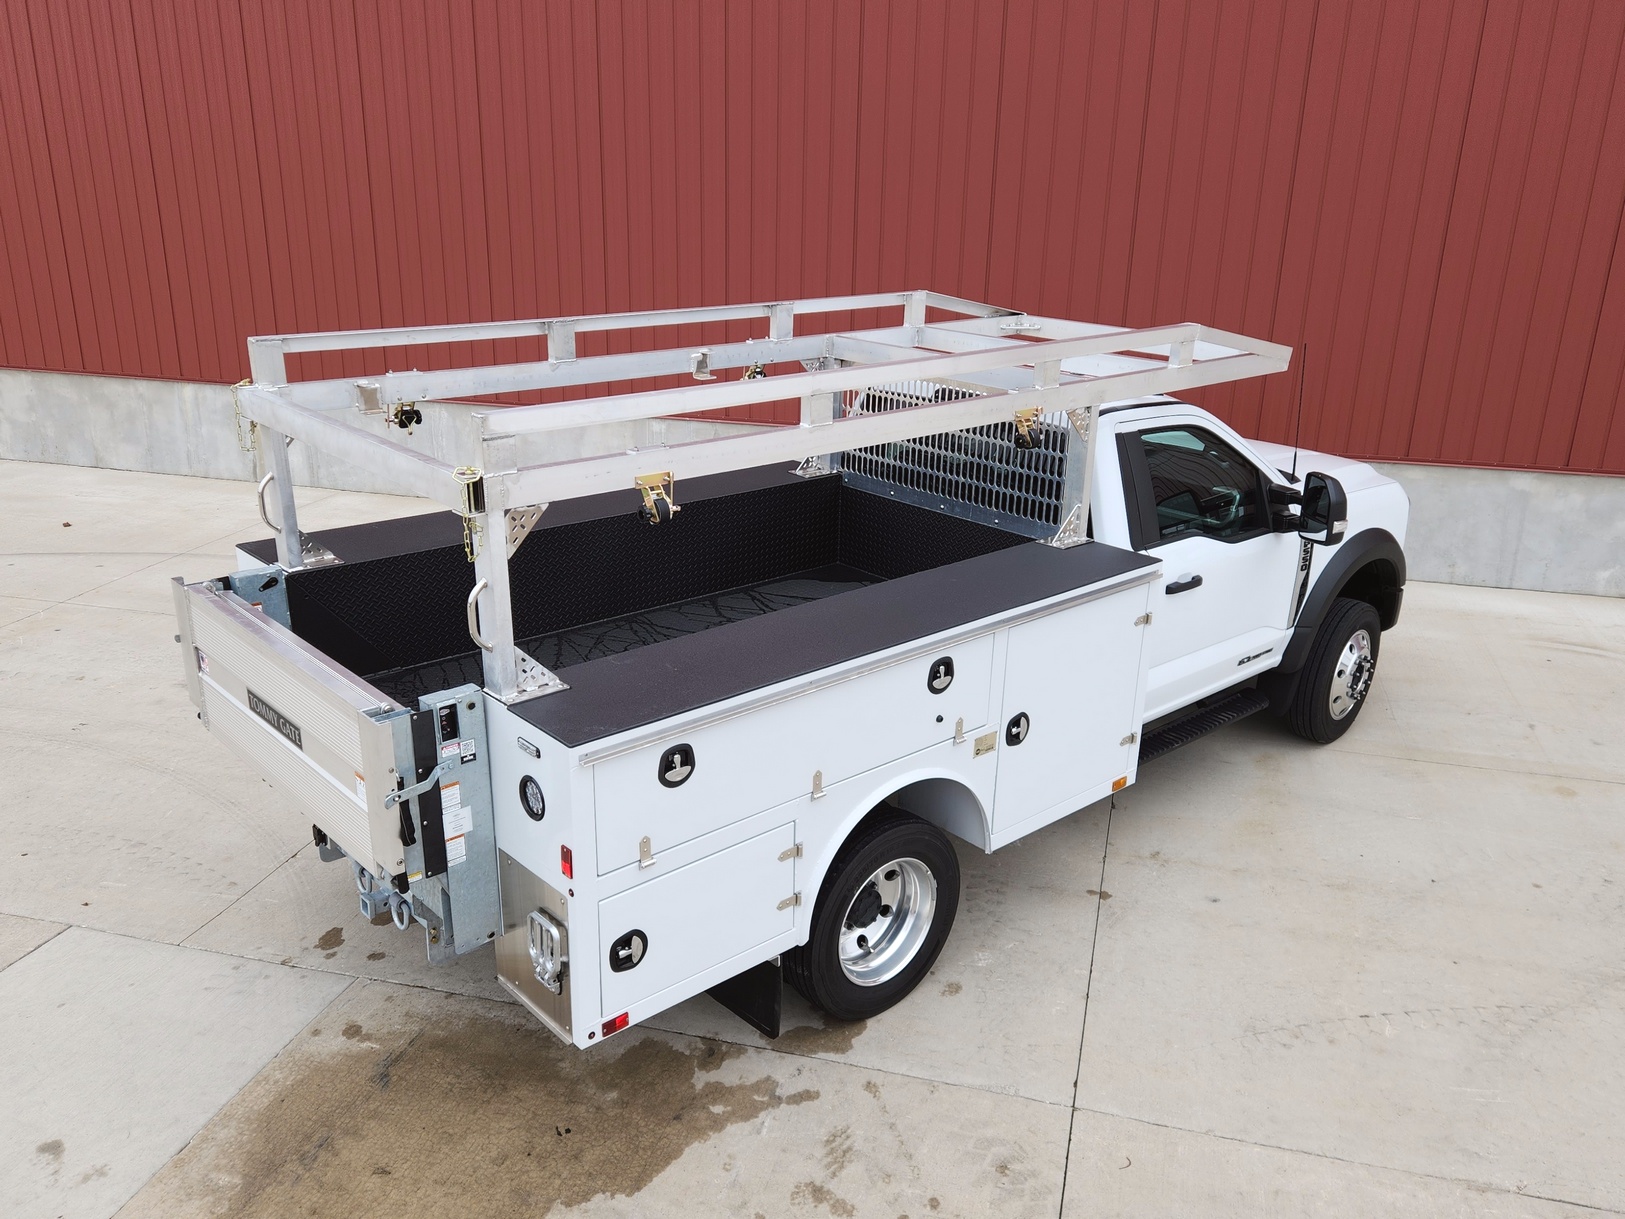 Right side rear view of a Sauber Mfg. Co. NexGen Aluminum Service Body. Shown in white with natural aluminum ladder rack and galvanized lift gate / bumper assembly with hitch. The truck is shown in front of a red metal building on concrete